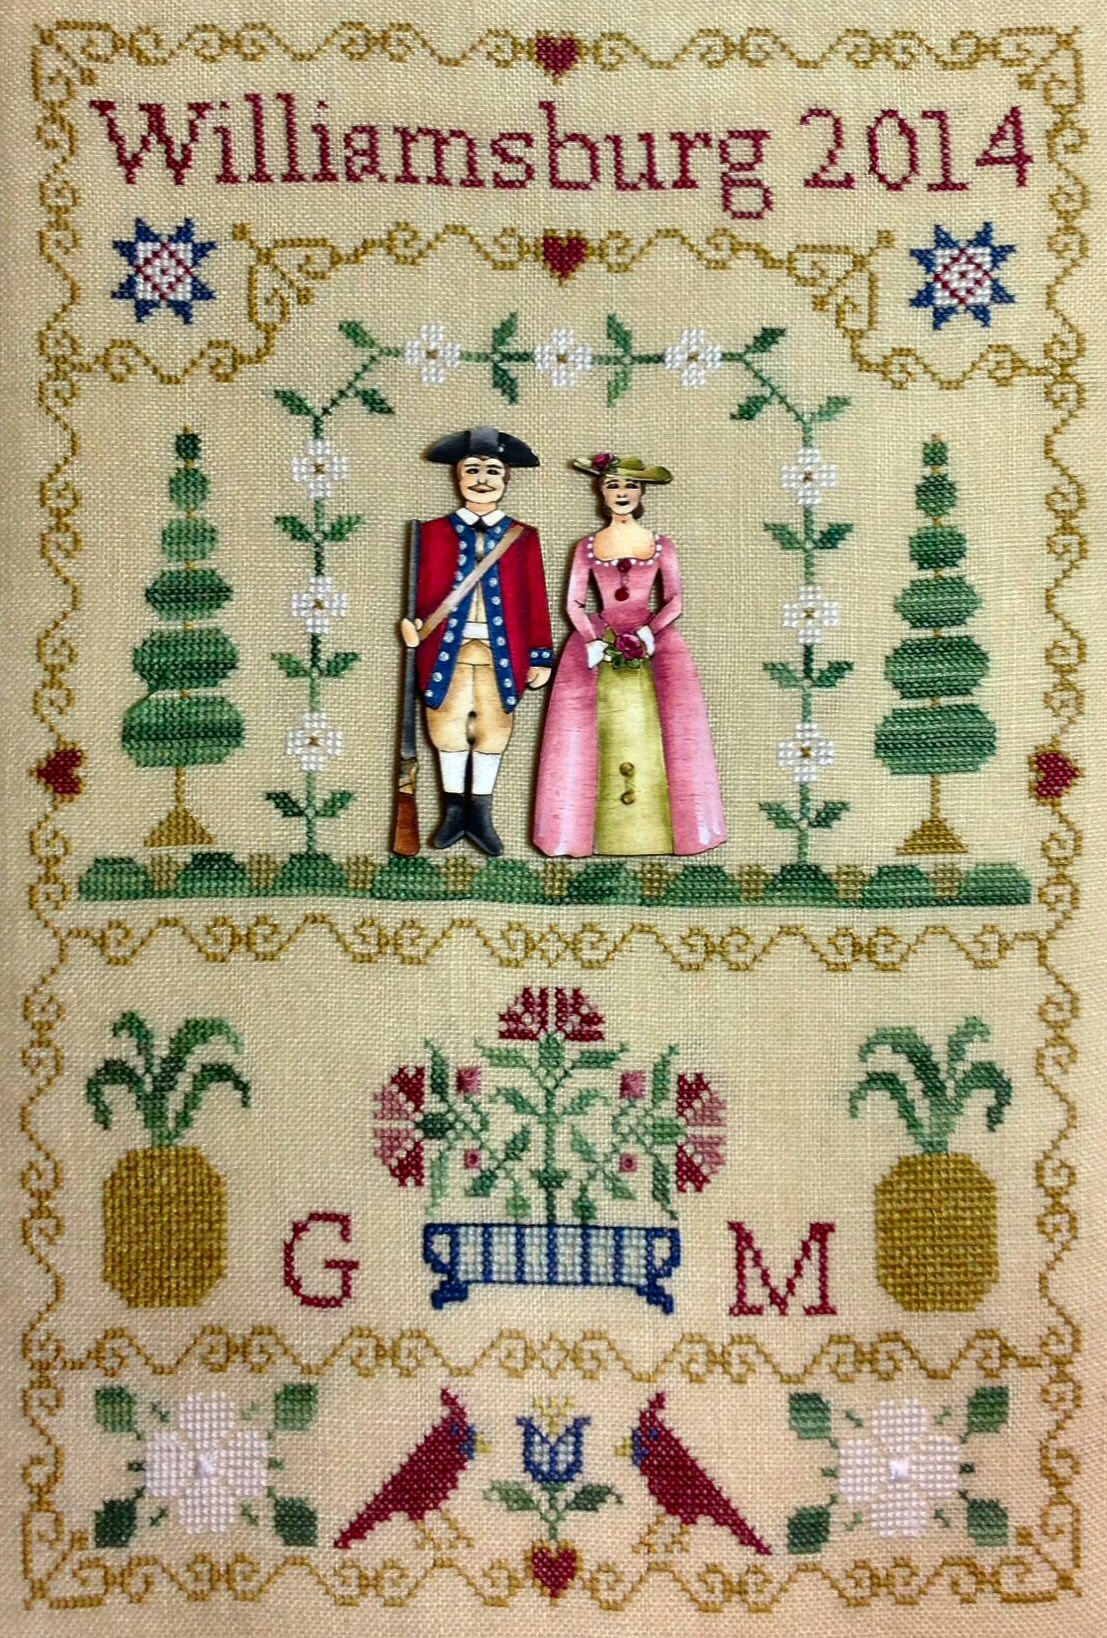 Colonial Embroidery Patterns A Williamsburg Welcome